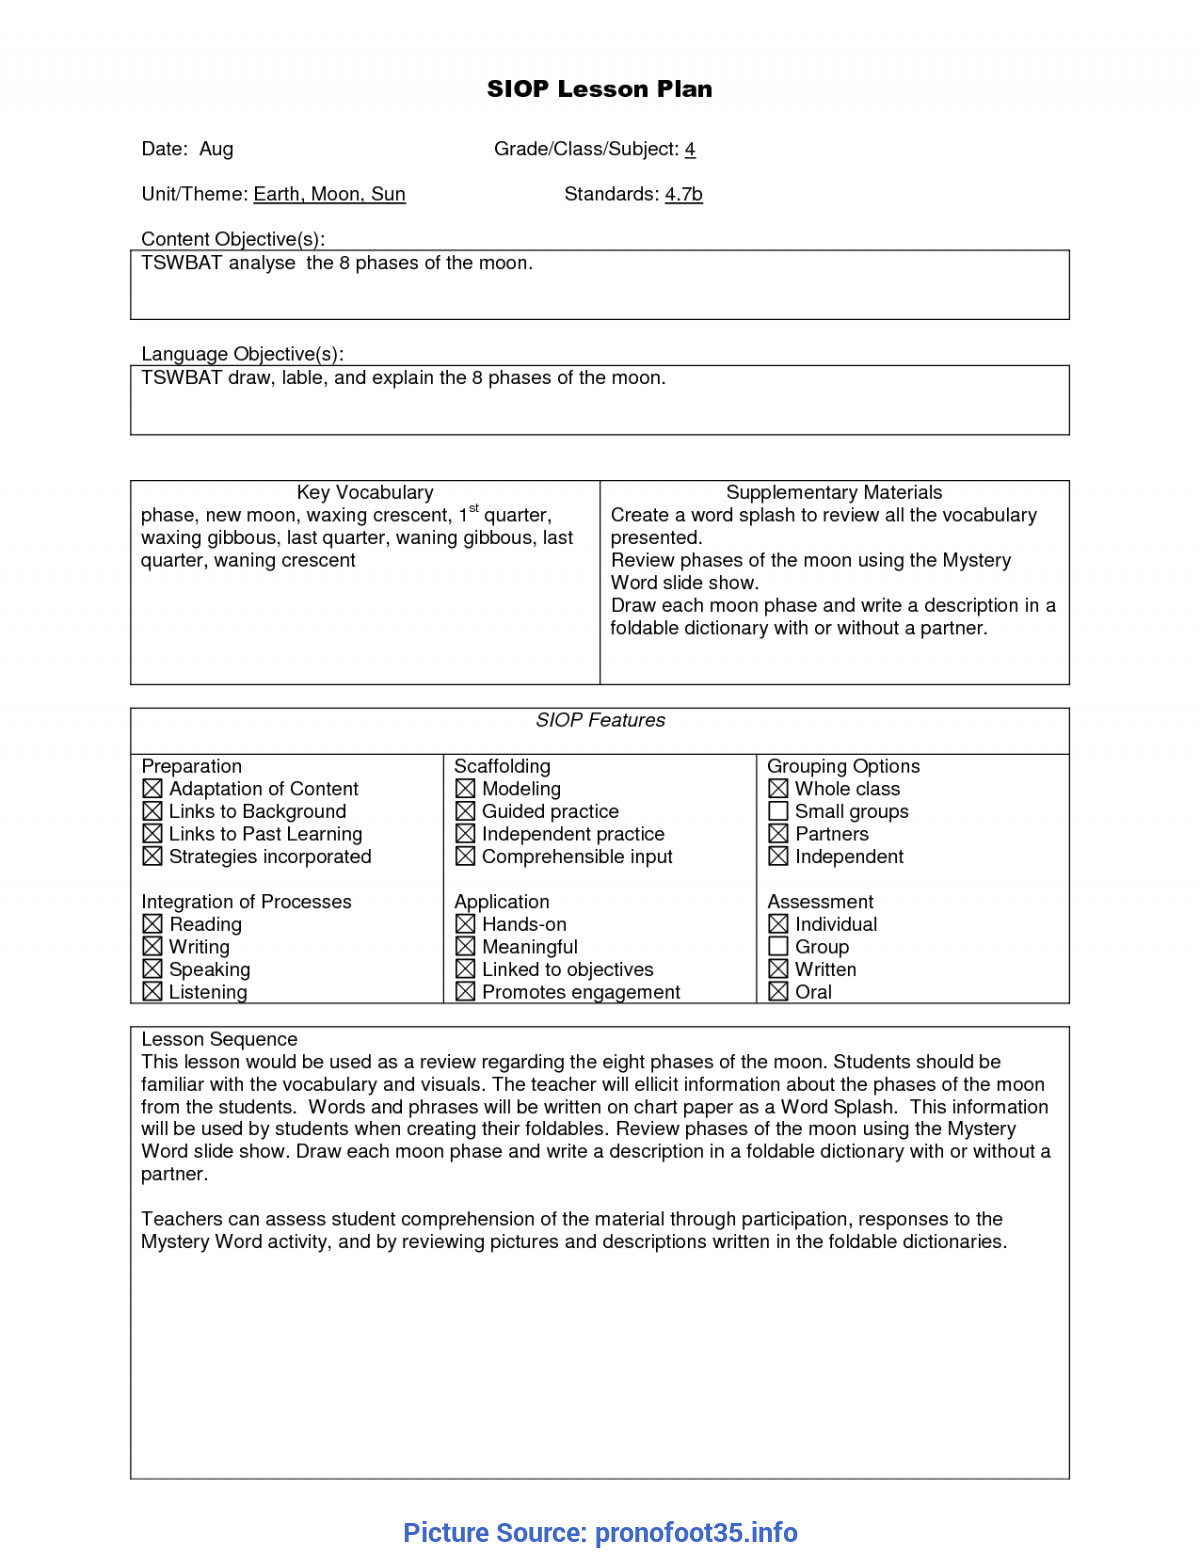 Siop Lesson Plan Best Lessons Learned Report Example Lessons Learned